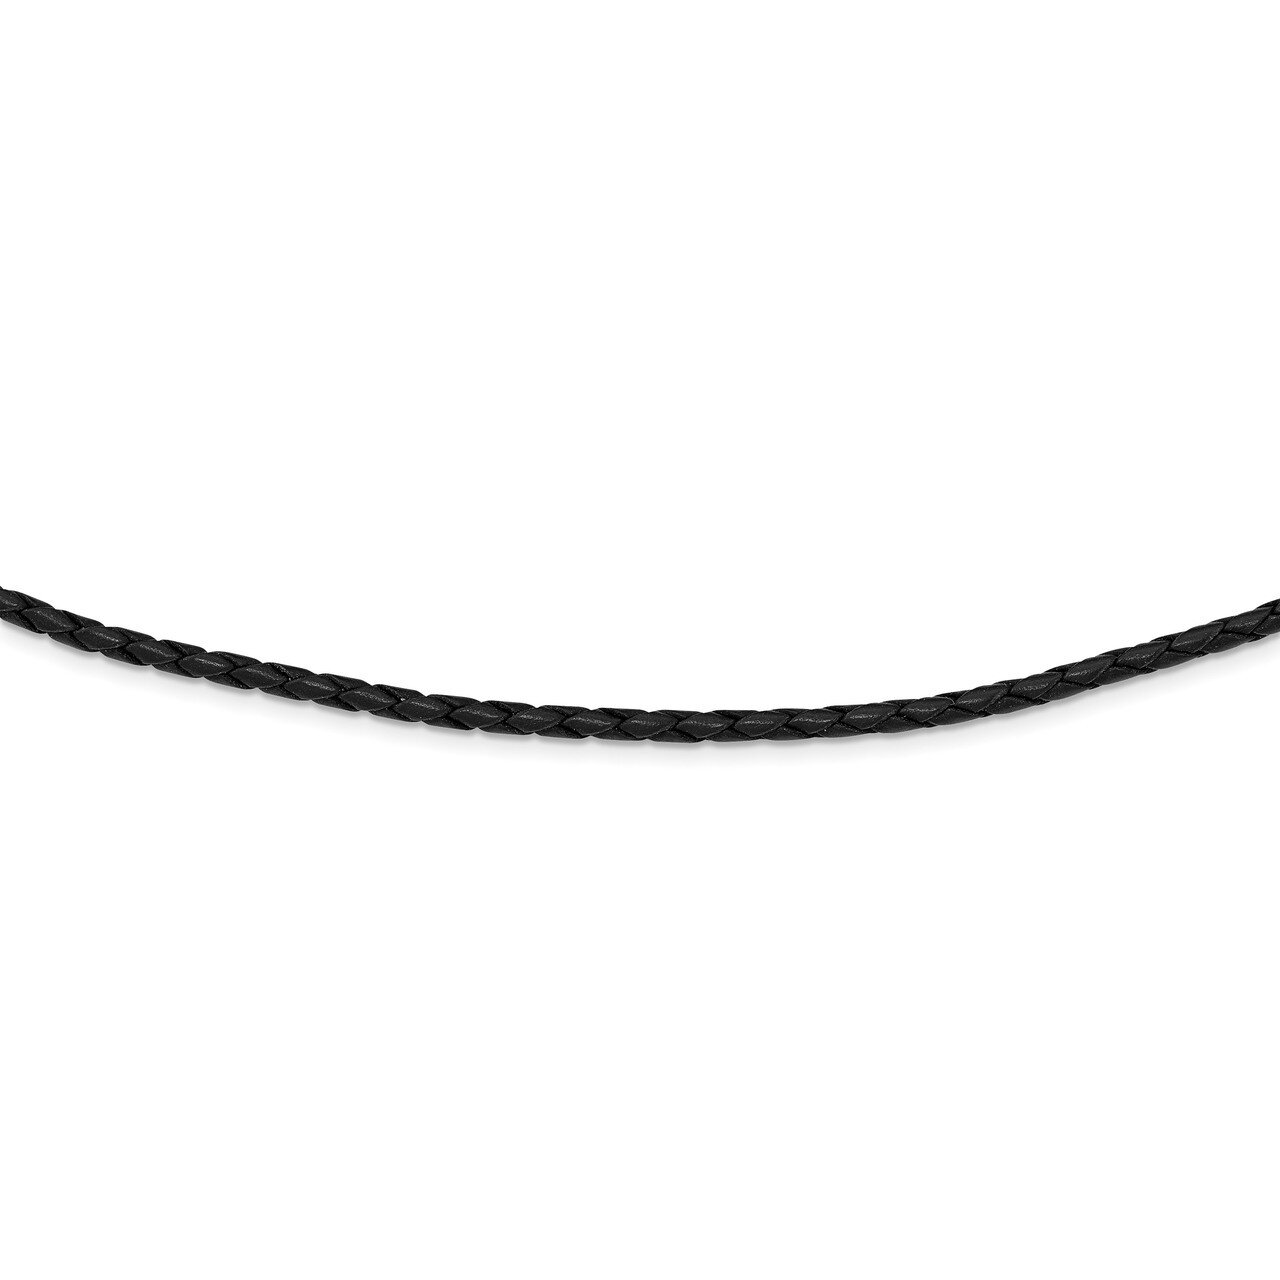 3mm Black Leather Braided Necklace 18 Inch Sterling Silver QK90-18